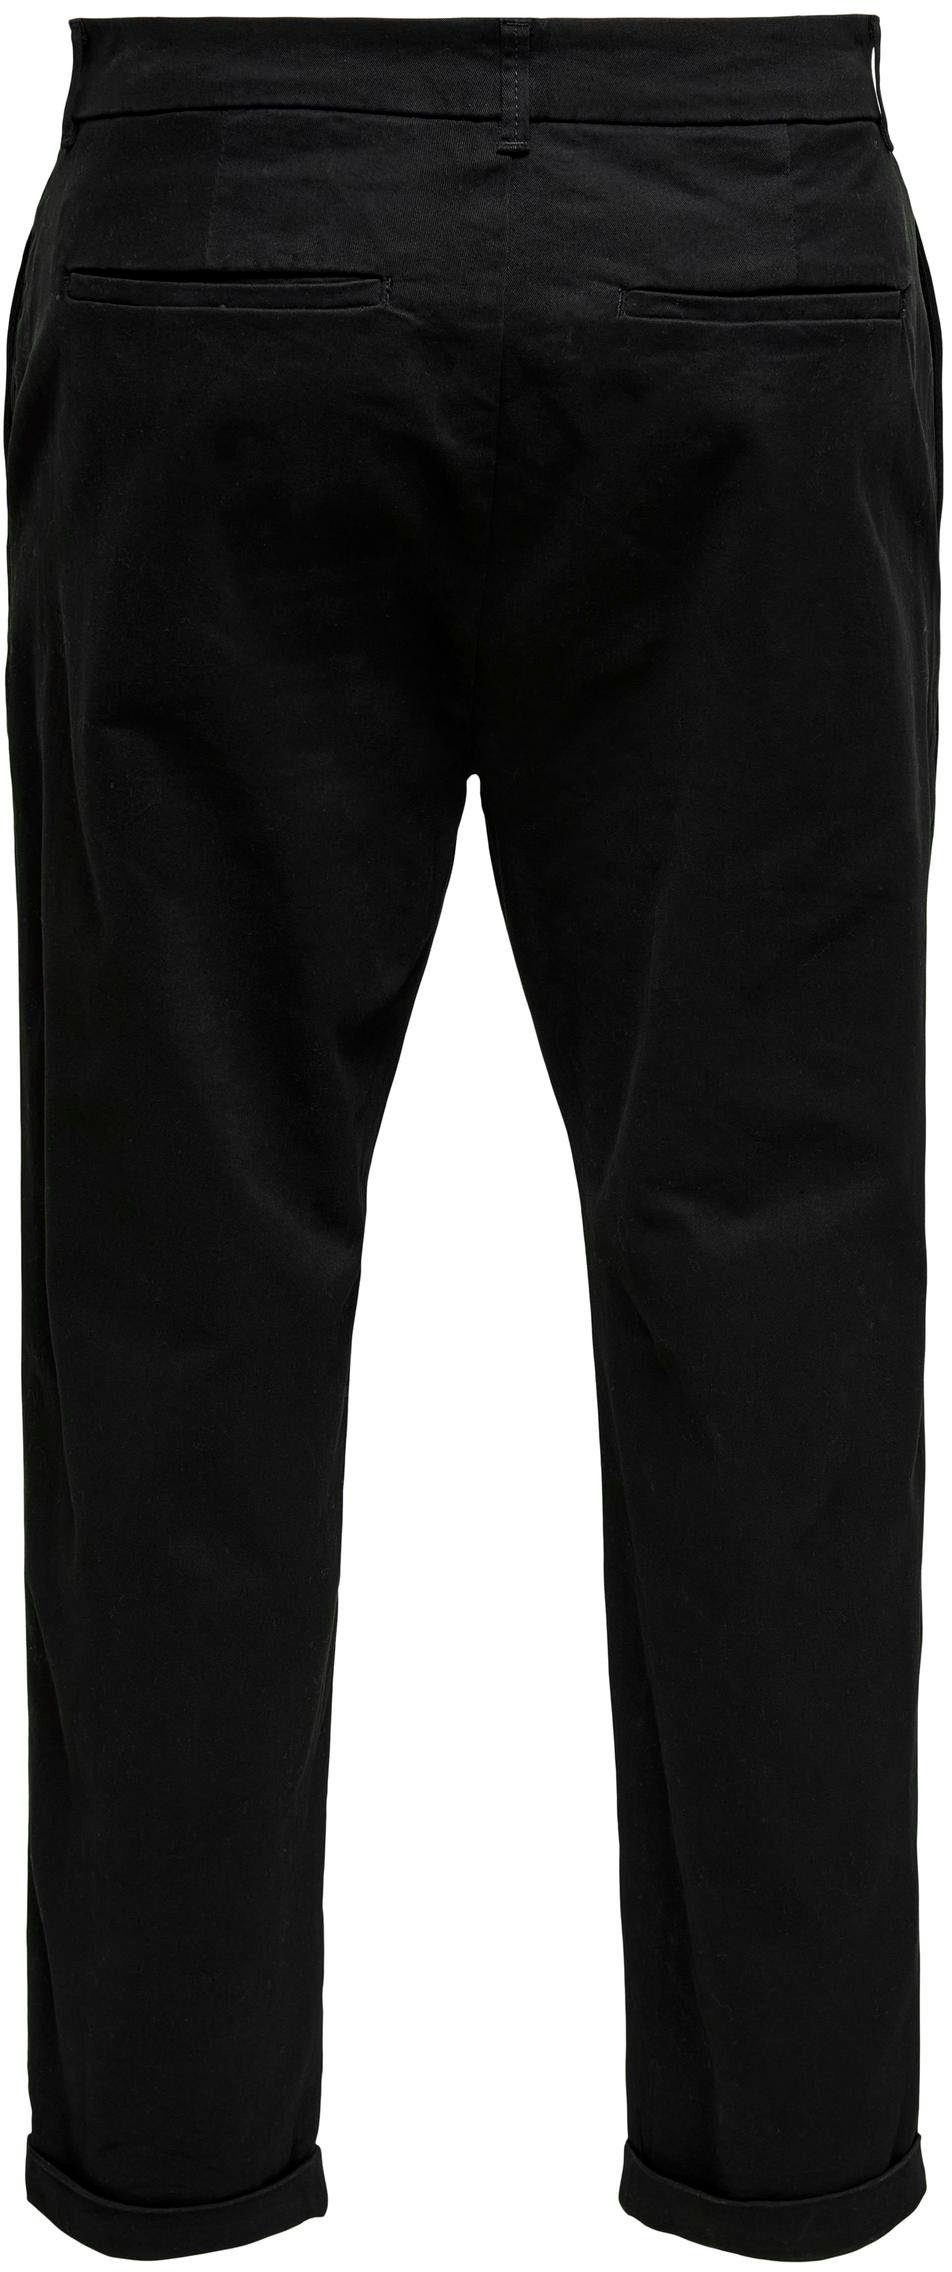 SONS & ONLY Chinohose black ONSKENT CHINO OS CROPPED